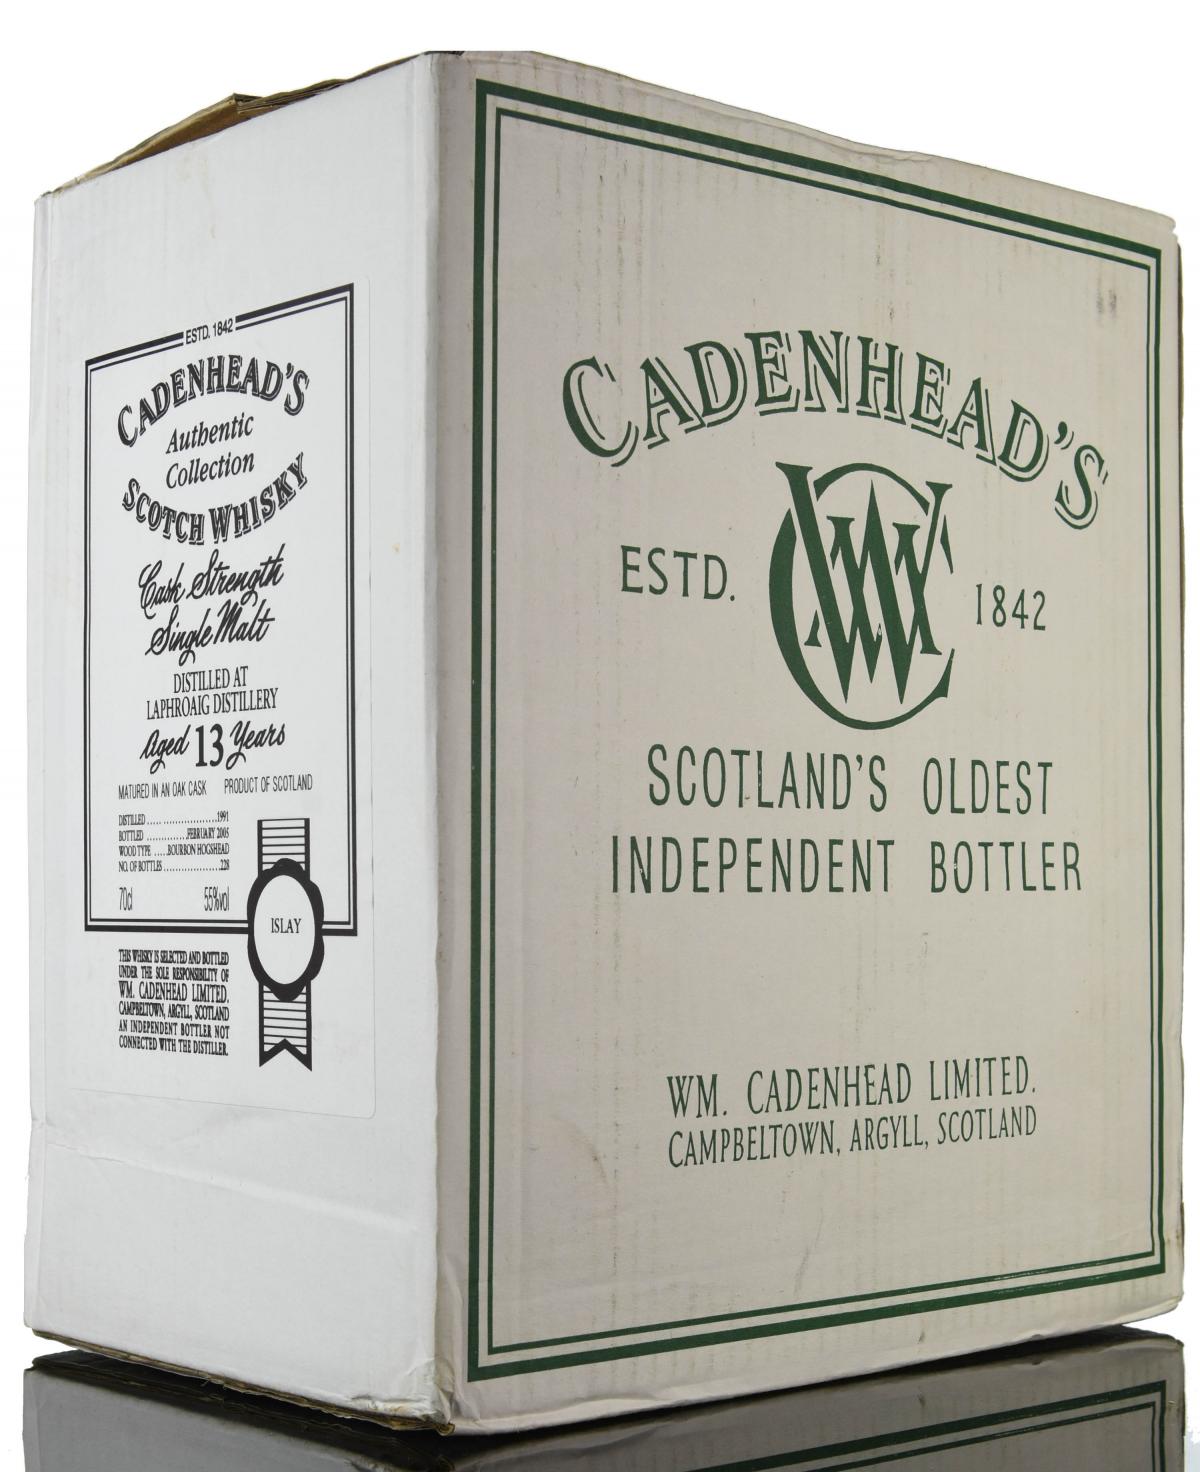 1 Case Laphroaig 1991-2005 - 13 Year Old - Cadenheads Authentic Collection